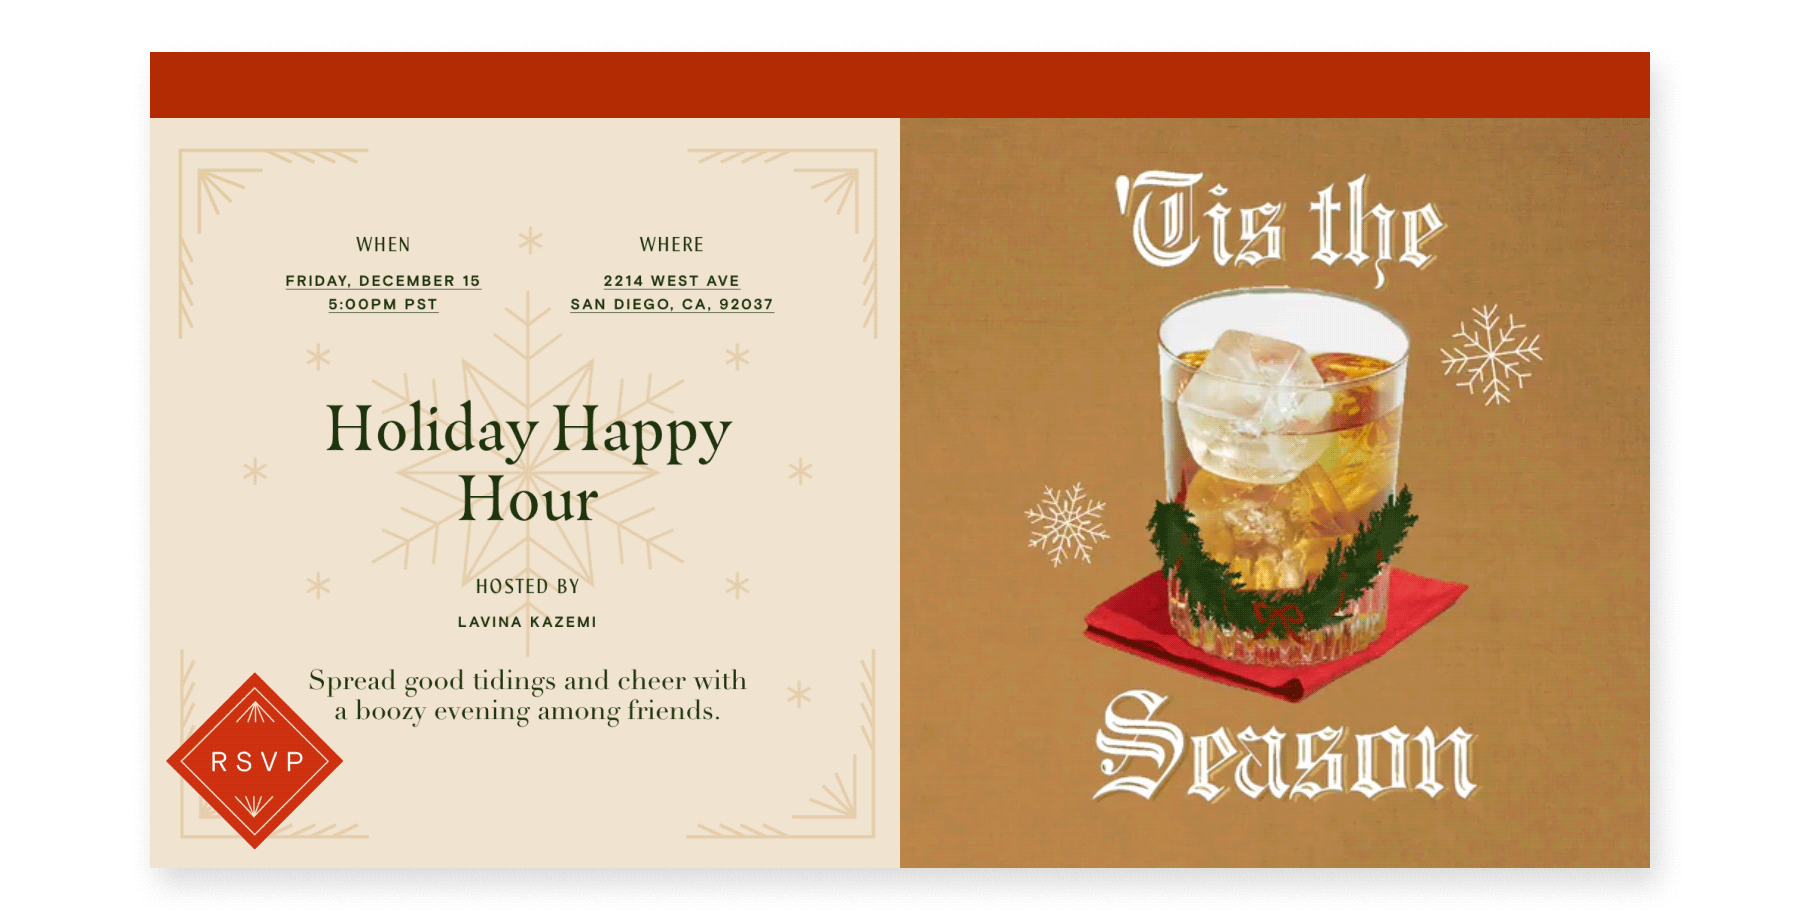 An online invitation says “‘Tis the Season” with a photo of a drink in a rocks glass and animated snowflakes.